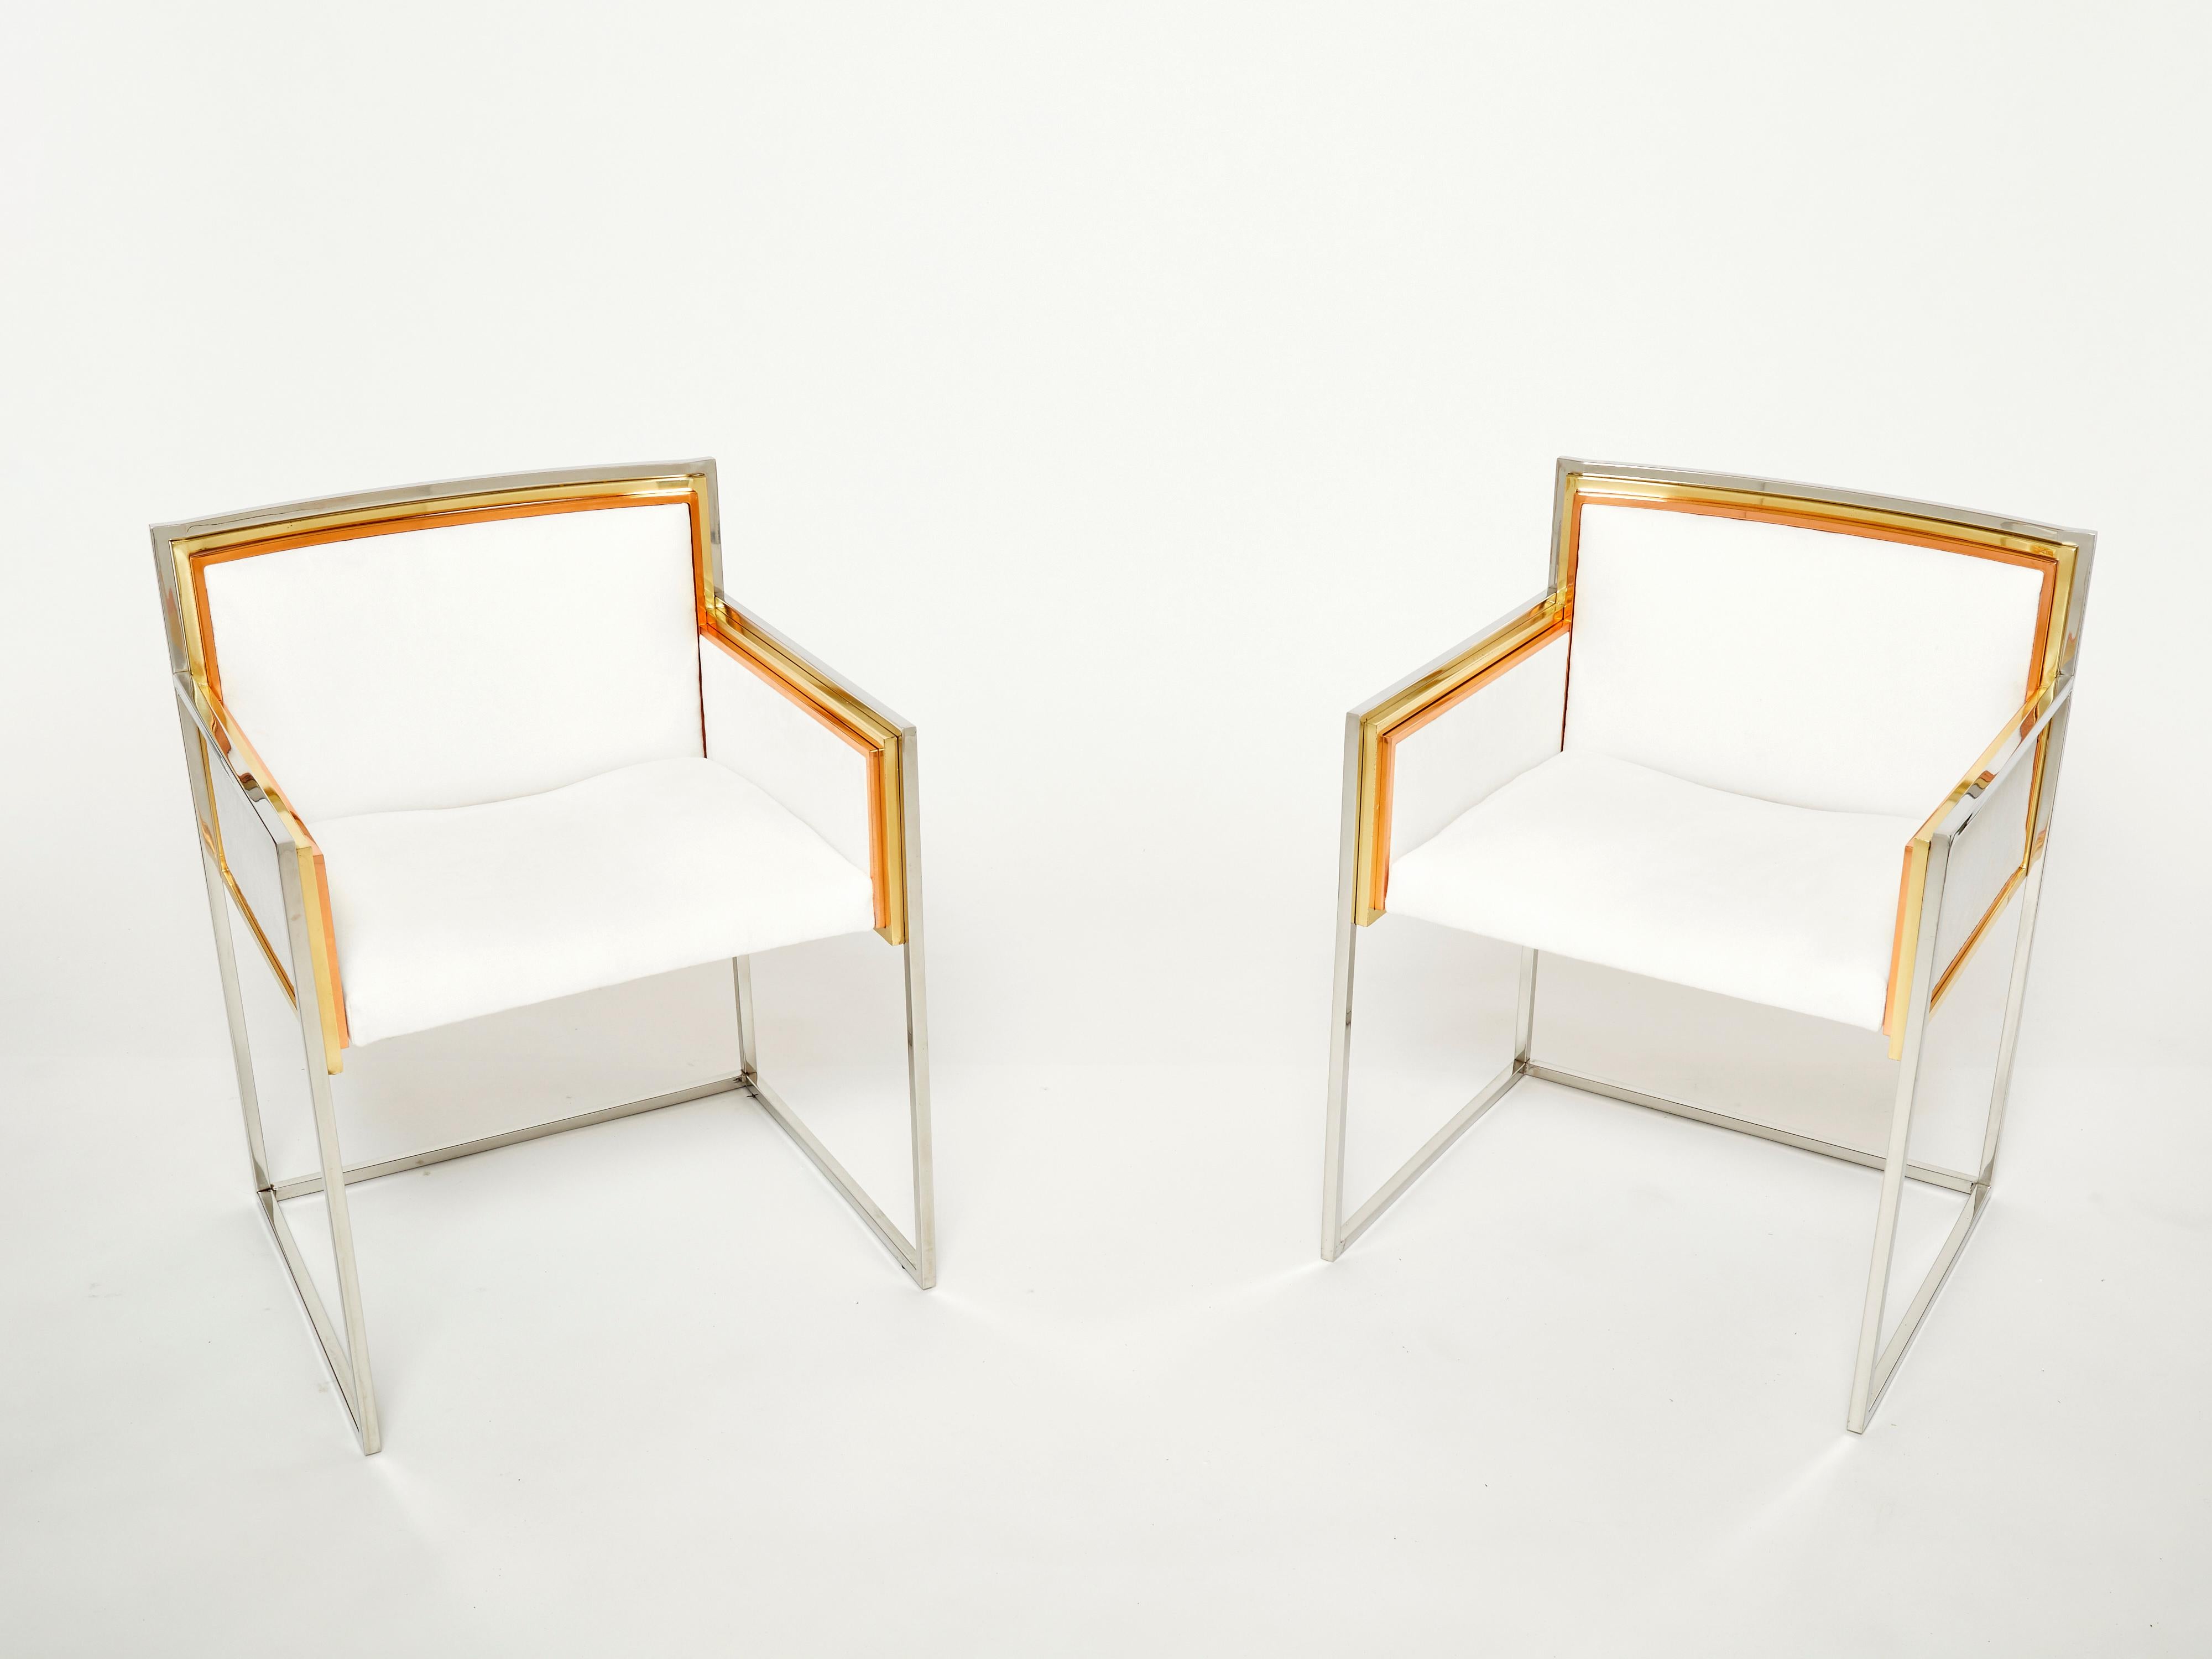 The white alcantara fabric and mix of metals with brass copper and chrome layers make up the decorative frame of this beautiful and rare pair of armchairs designed by Alain Delon and edited by Maison Jansen in 1972. A rare find, very comfortable,